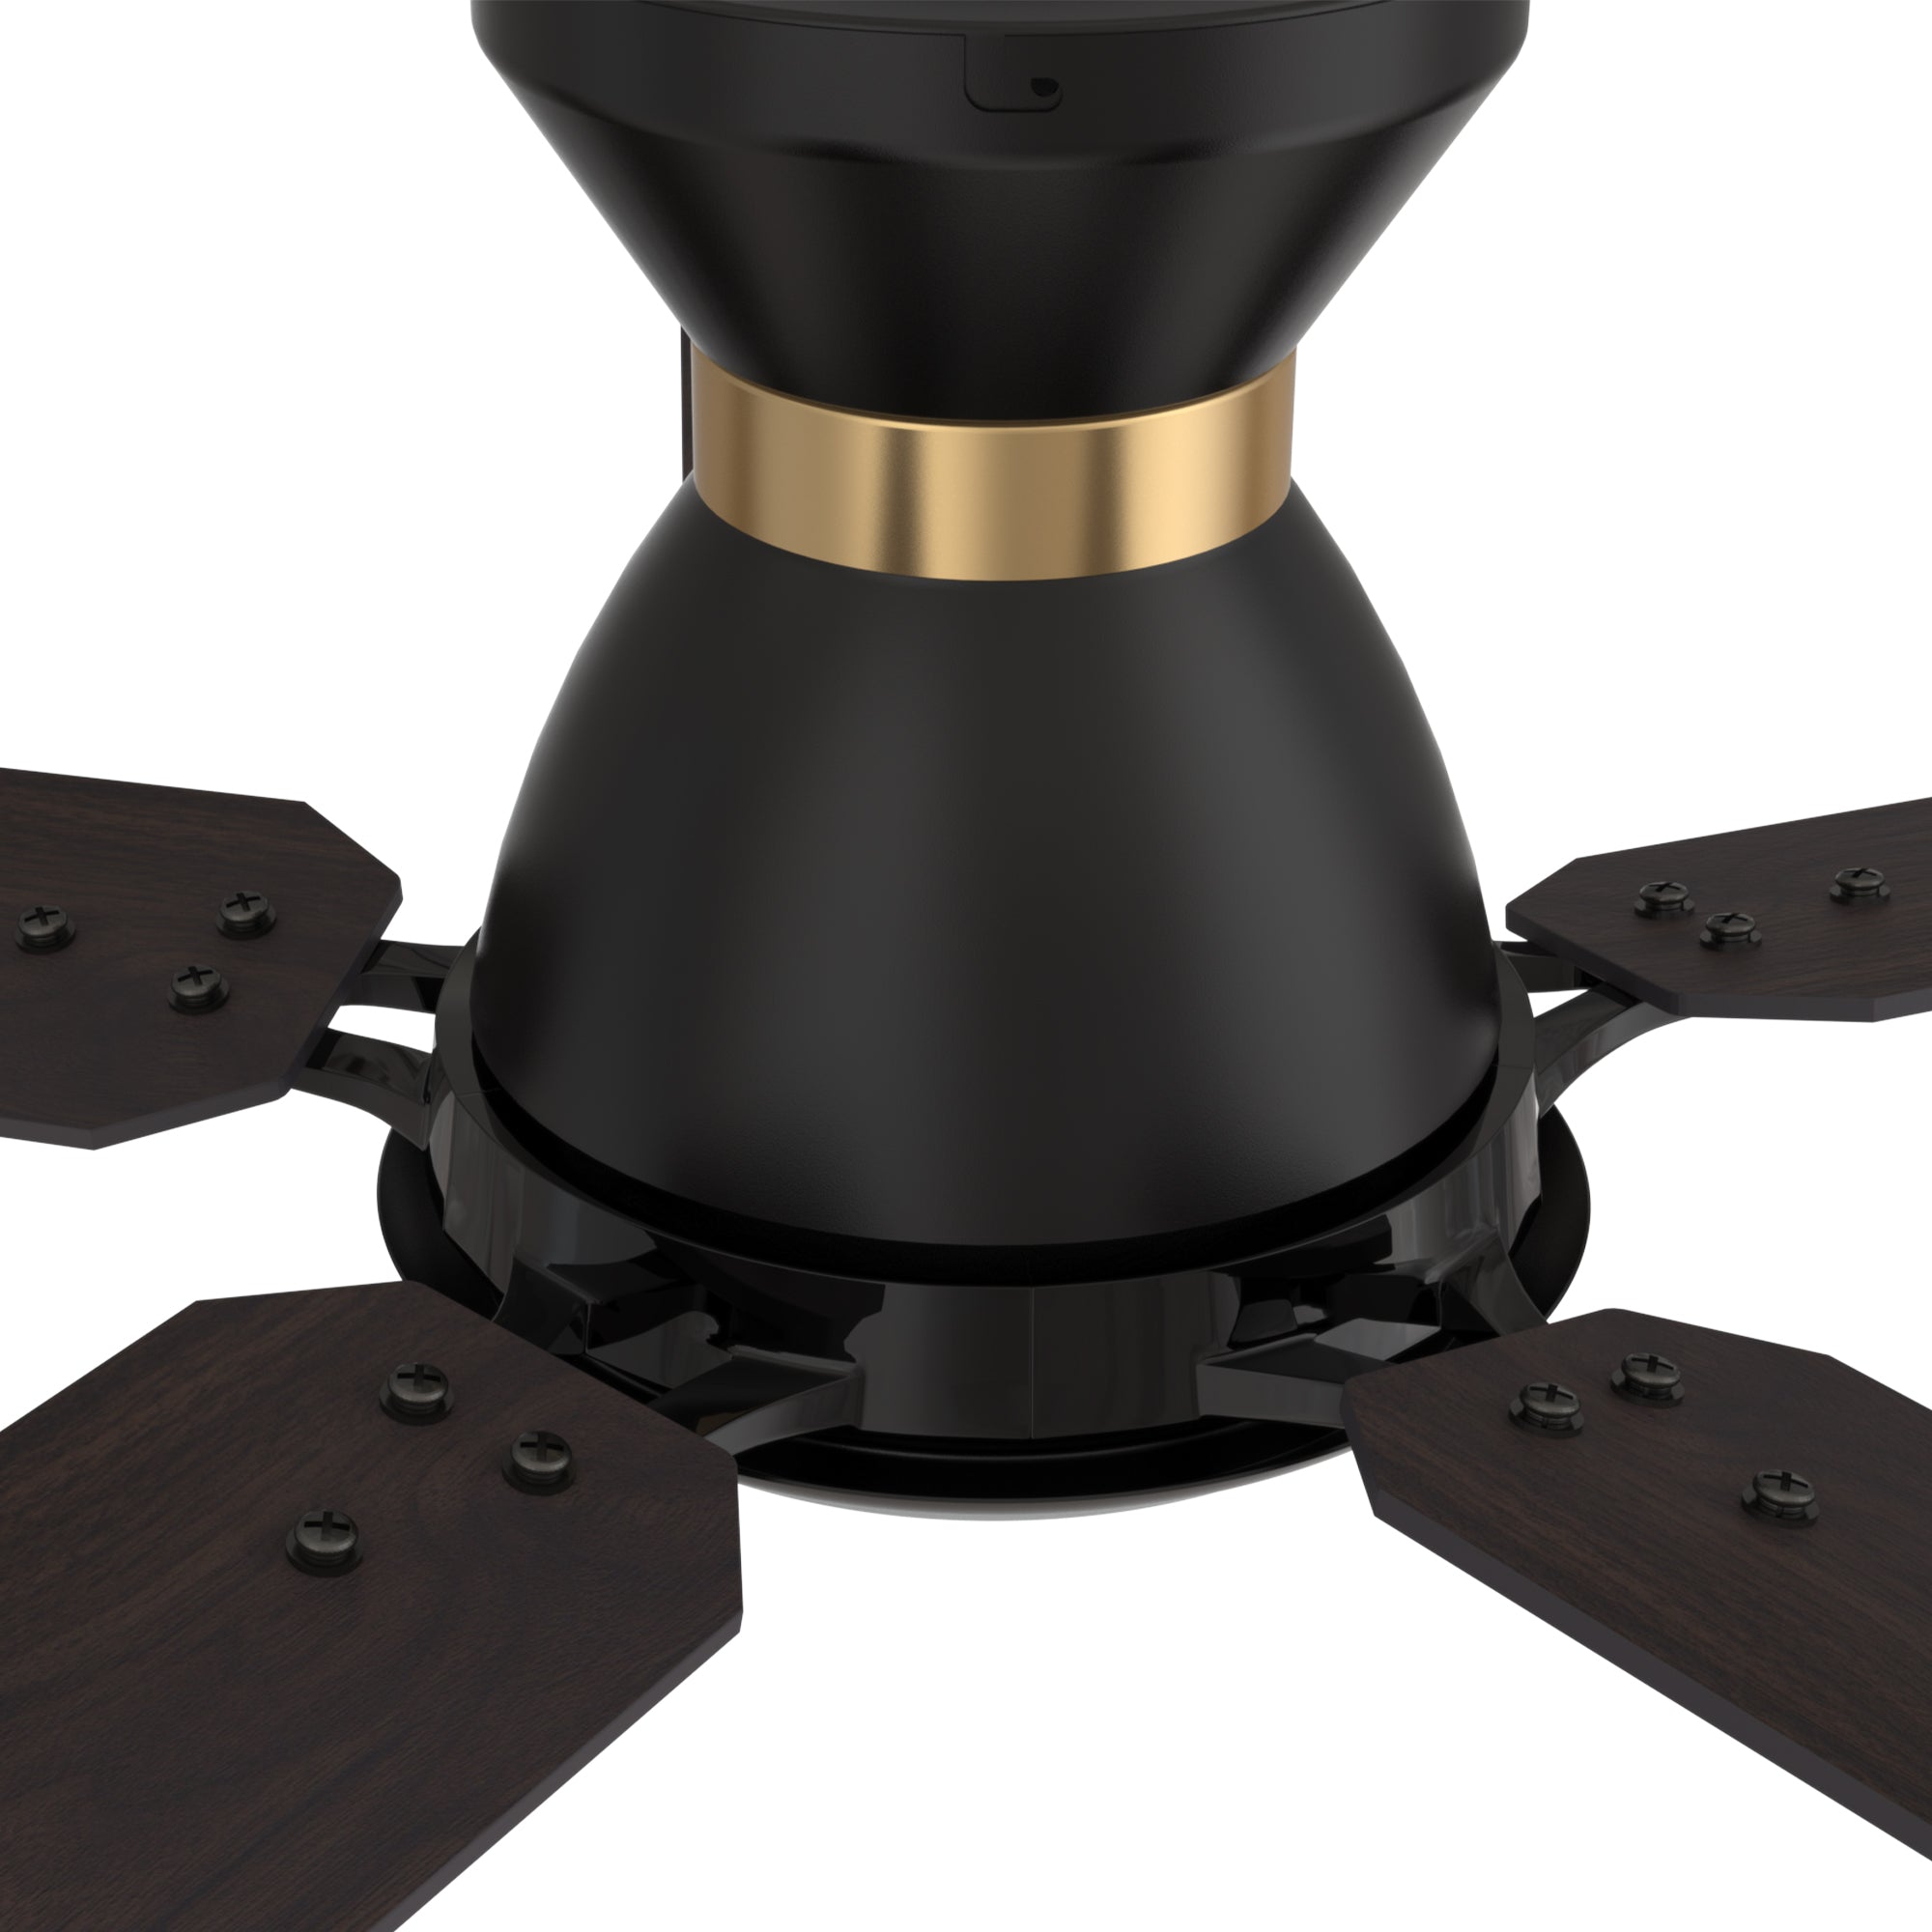 This Smafan Essex 52&#39;&#39; flush mount smart ceiling fan keeps your space cool,features Remote control, Wi-Fi apps, Siri Shortcut and Voice control technology (compatible with Amazon Alexa and Google Home Assistant ) to set fan preferences.